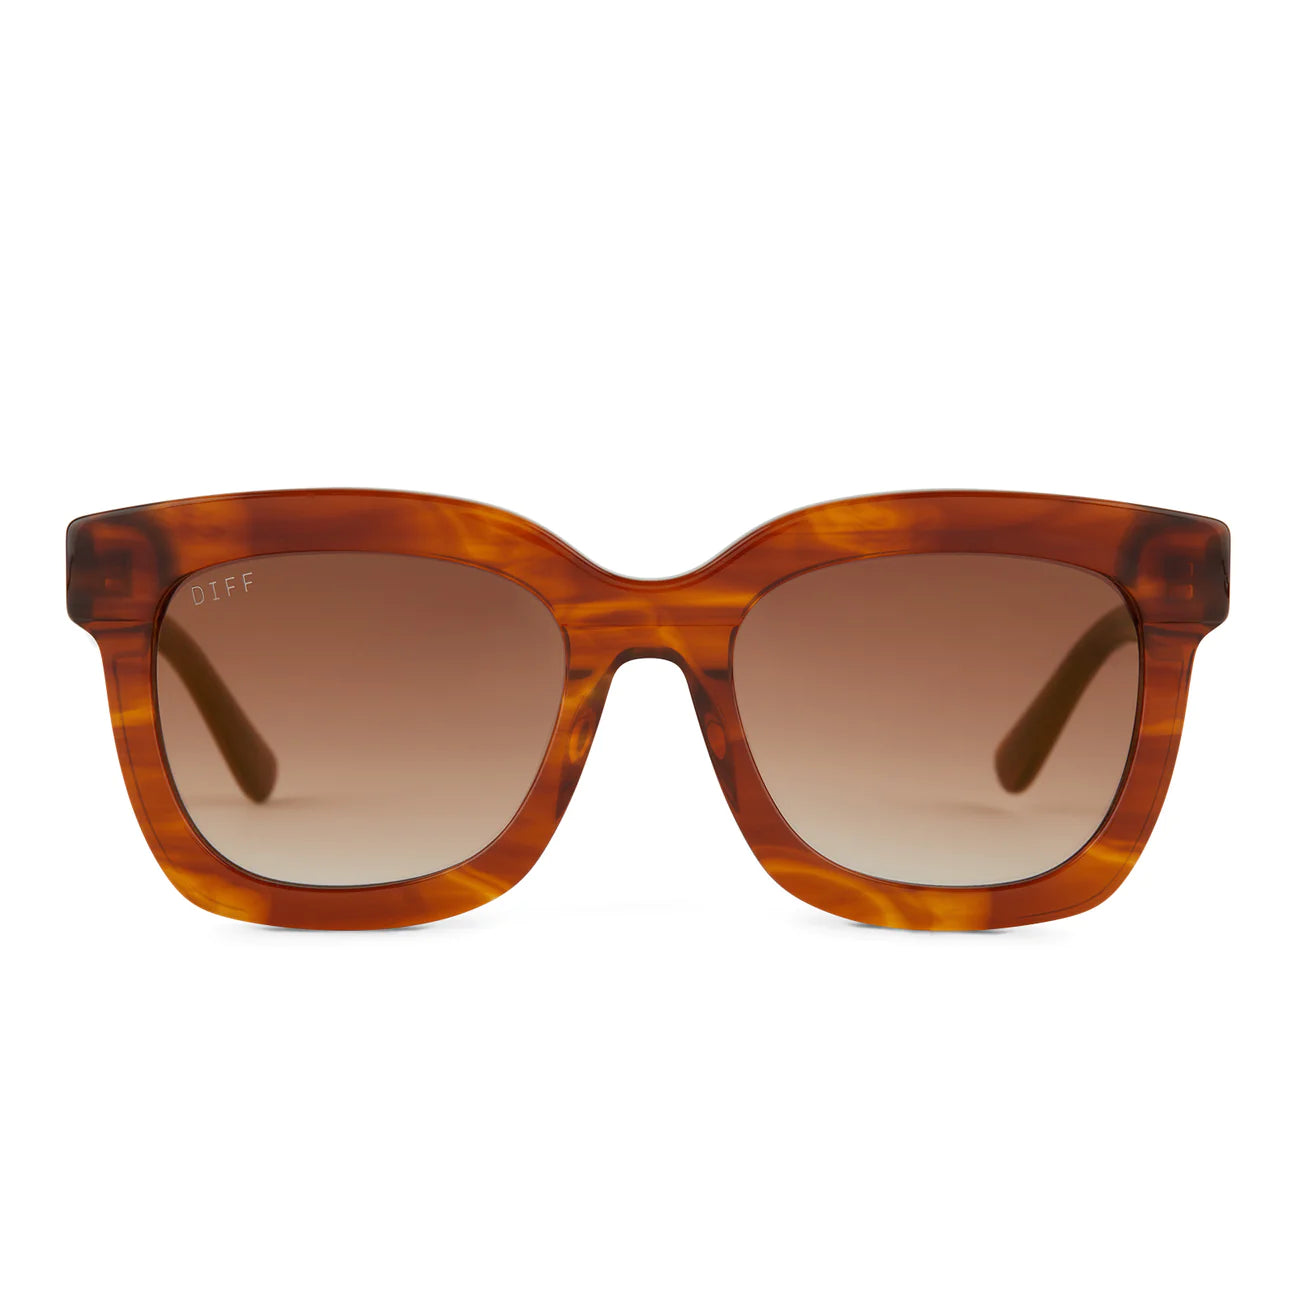 Gold and Brown Tortoise Sunglasses